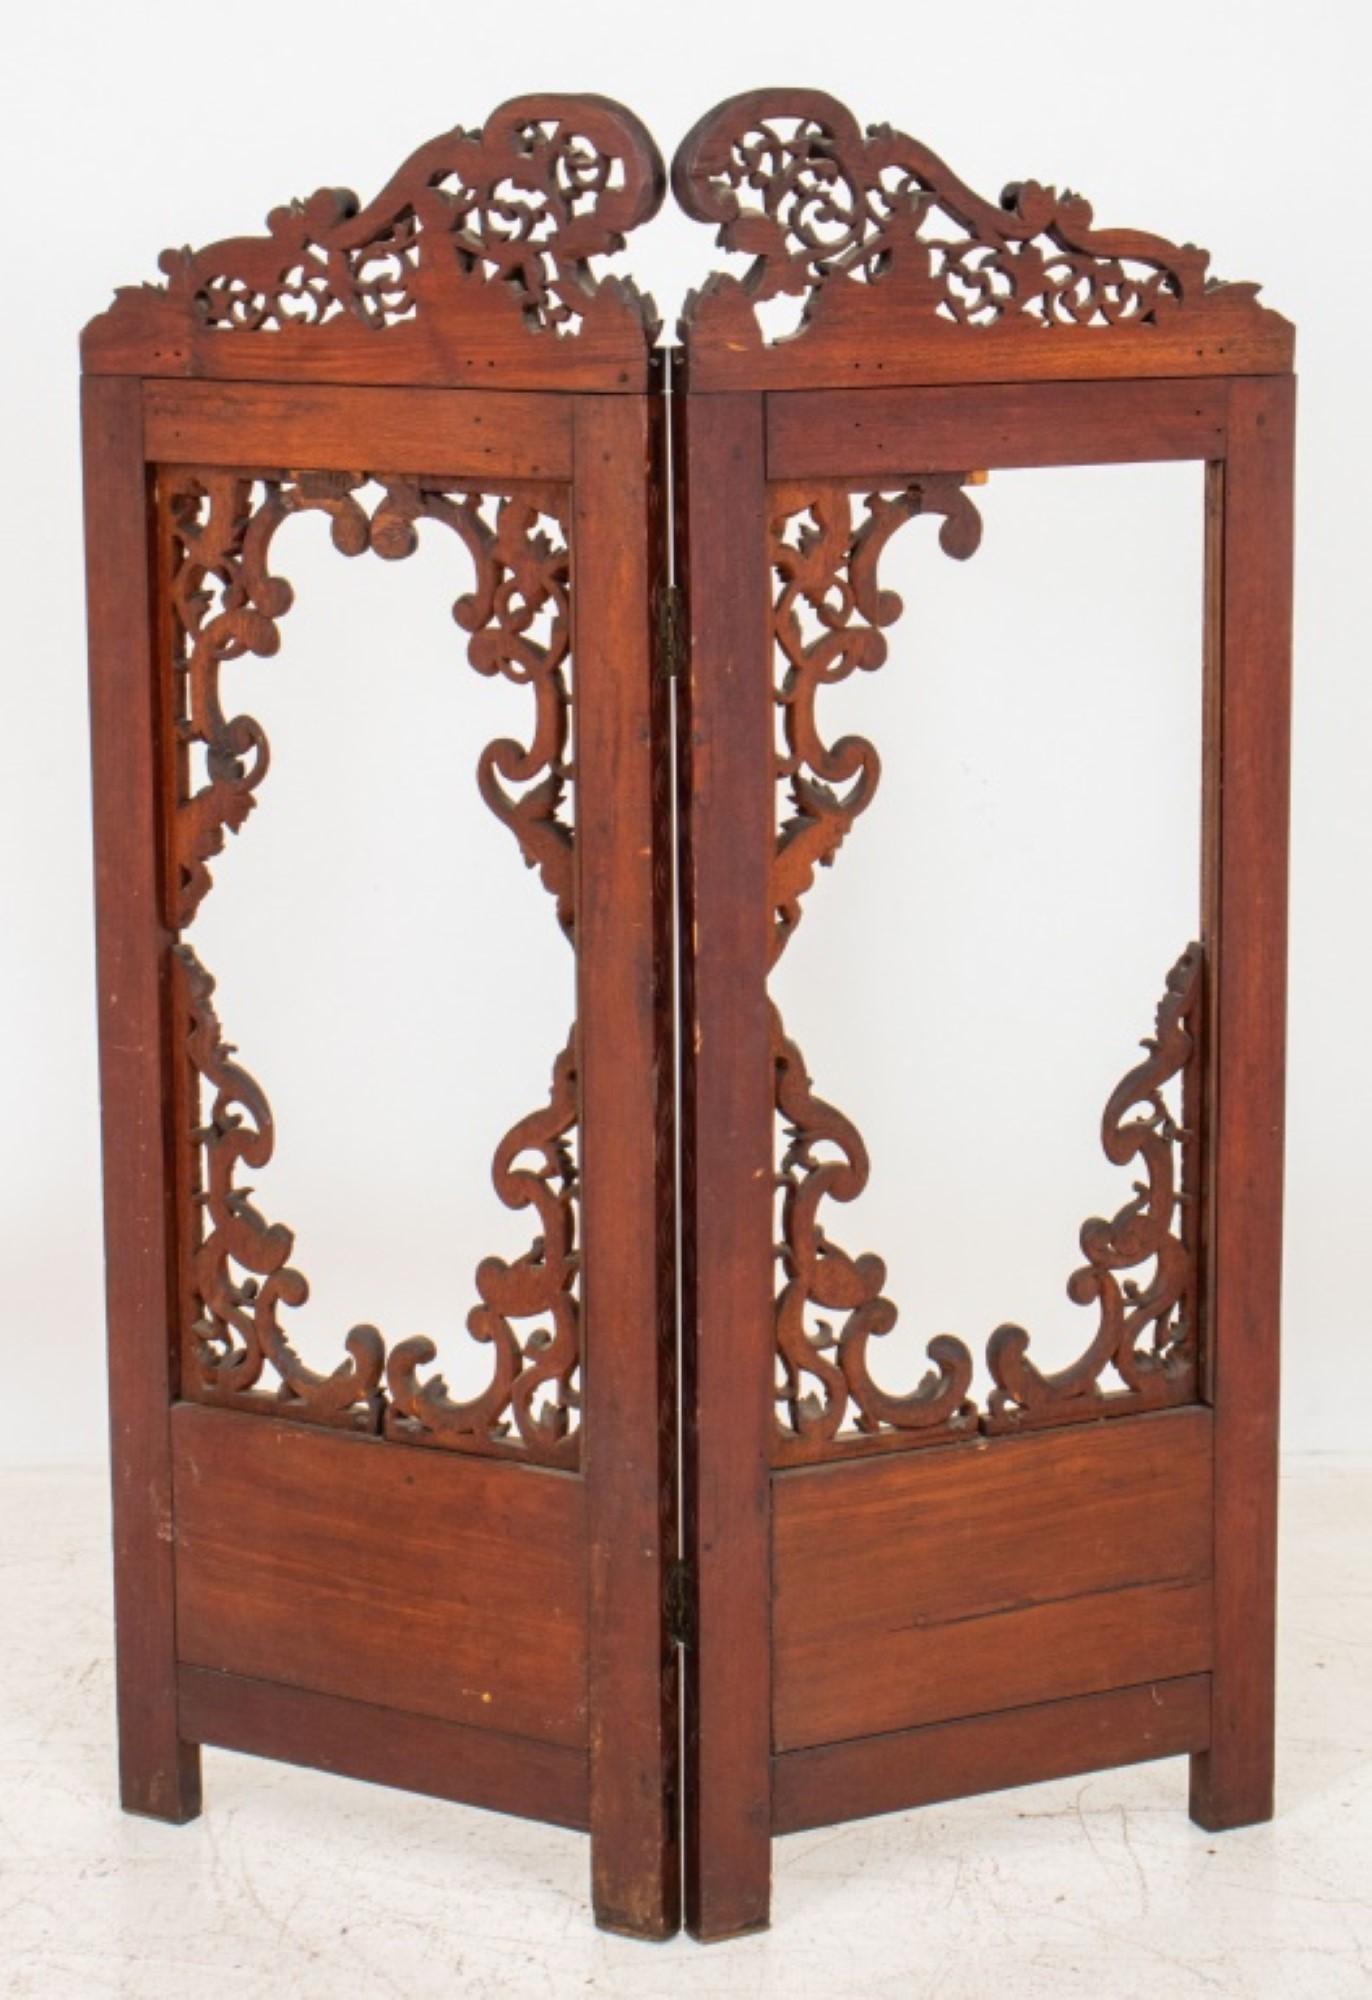  Indo-Portuguese rosewood two-panel screen, potentially originating from Goa, India. Here's a breakdown of its key features:

Origin: Indo-Portuguese (combining Indian and Portuguese influences)
Material: Rosewood
Structure: Two-panel